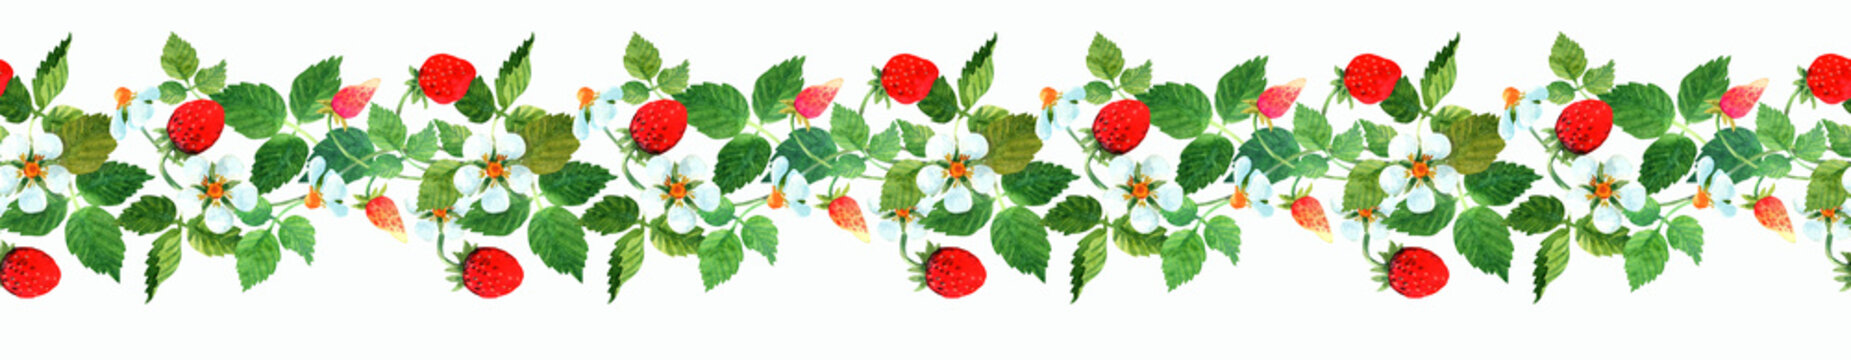 Watercolor woodland seamless border with wild strawberries, flowers and leaves. Hand drawn nature summer illustration isolated on white background. Fabric, card, poster, greeting, invitation, label